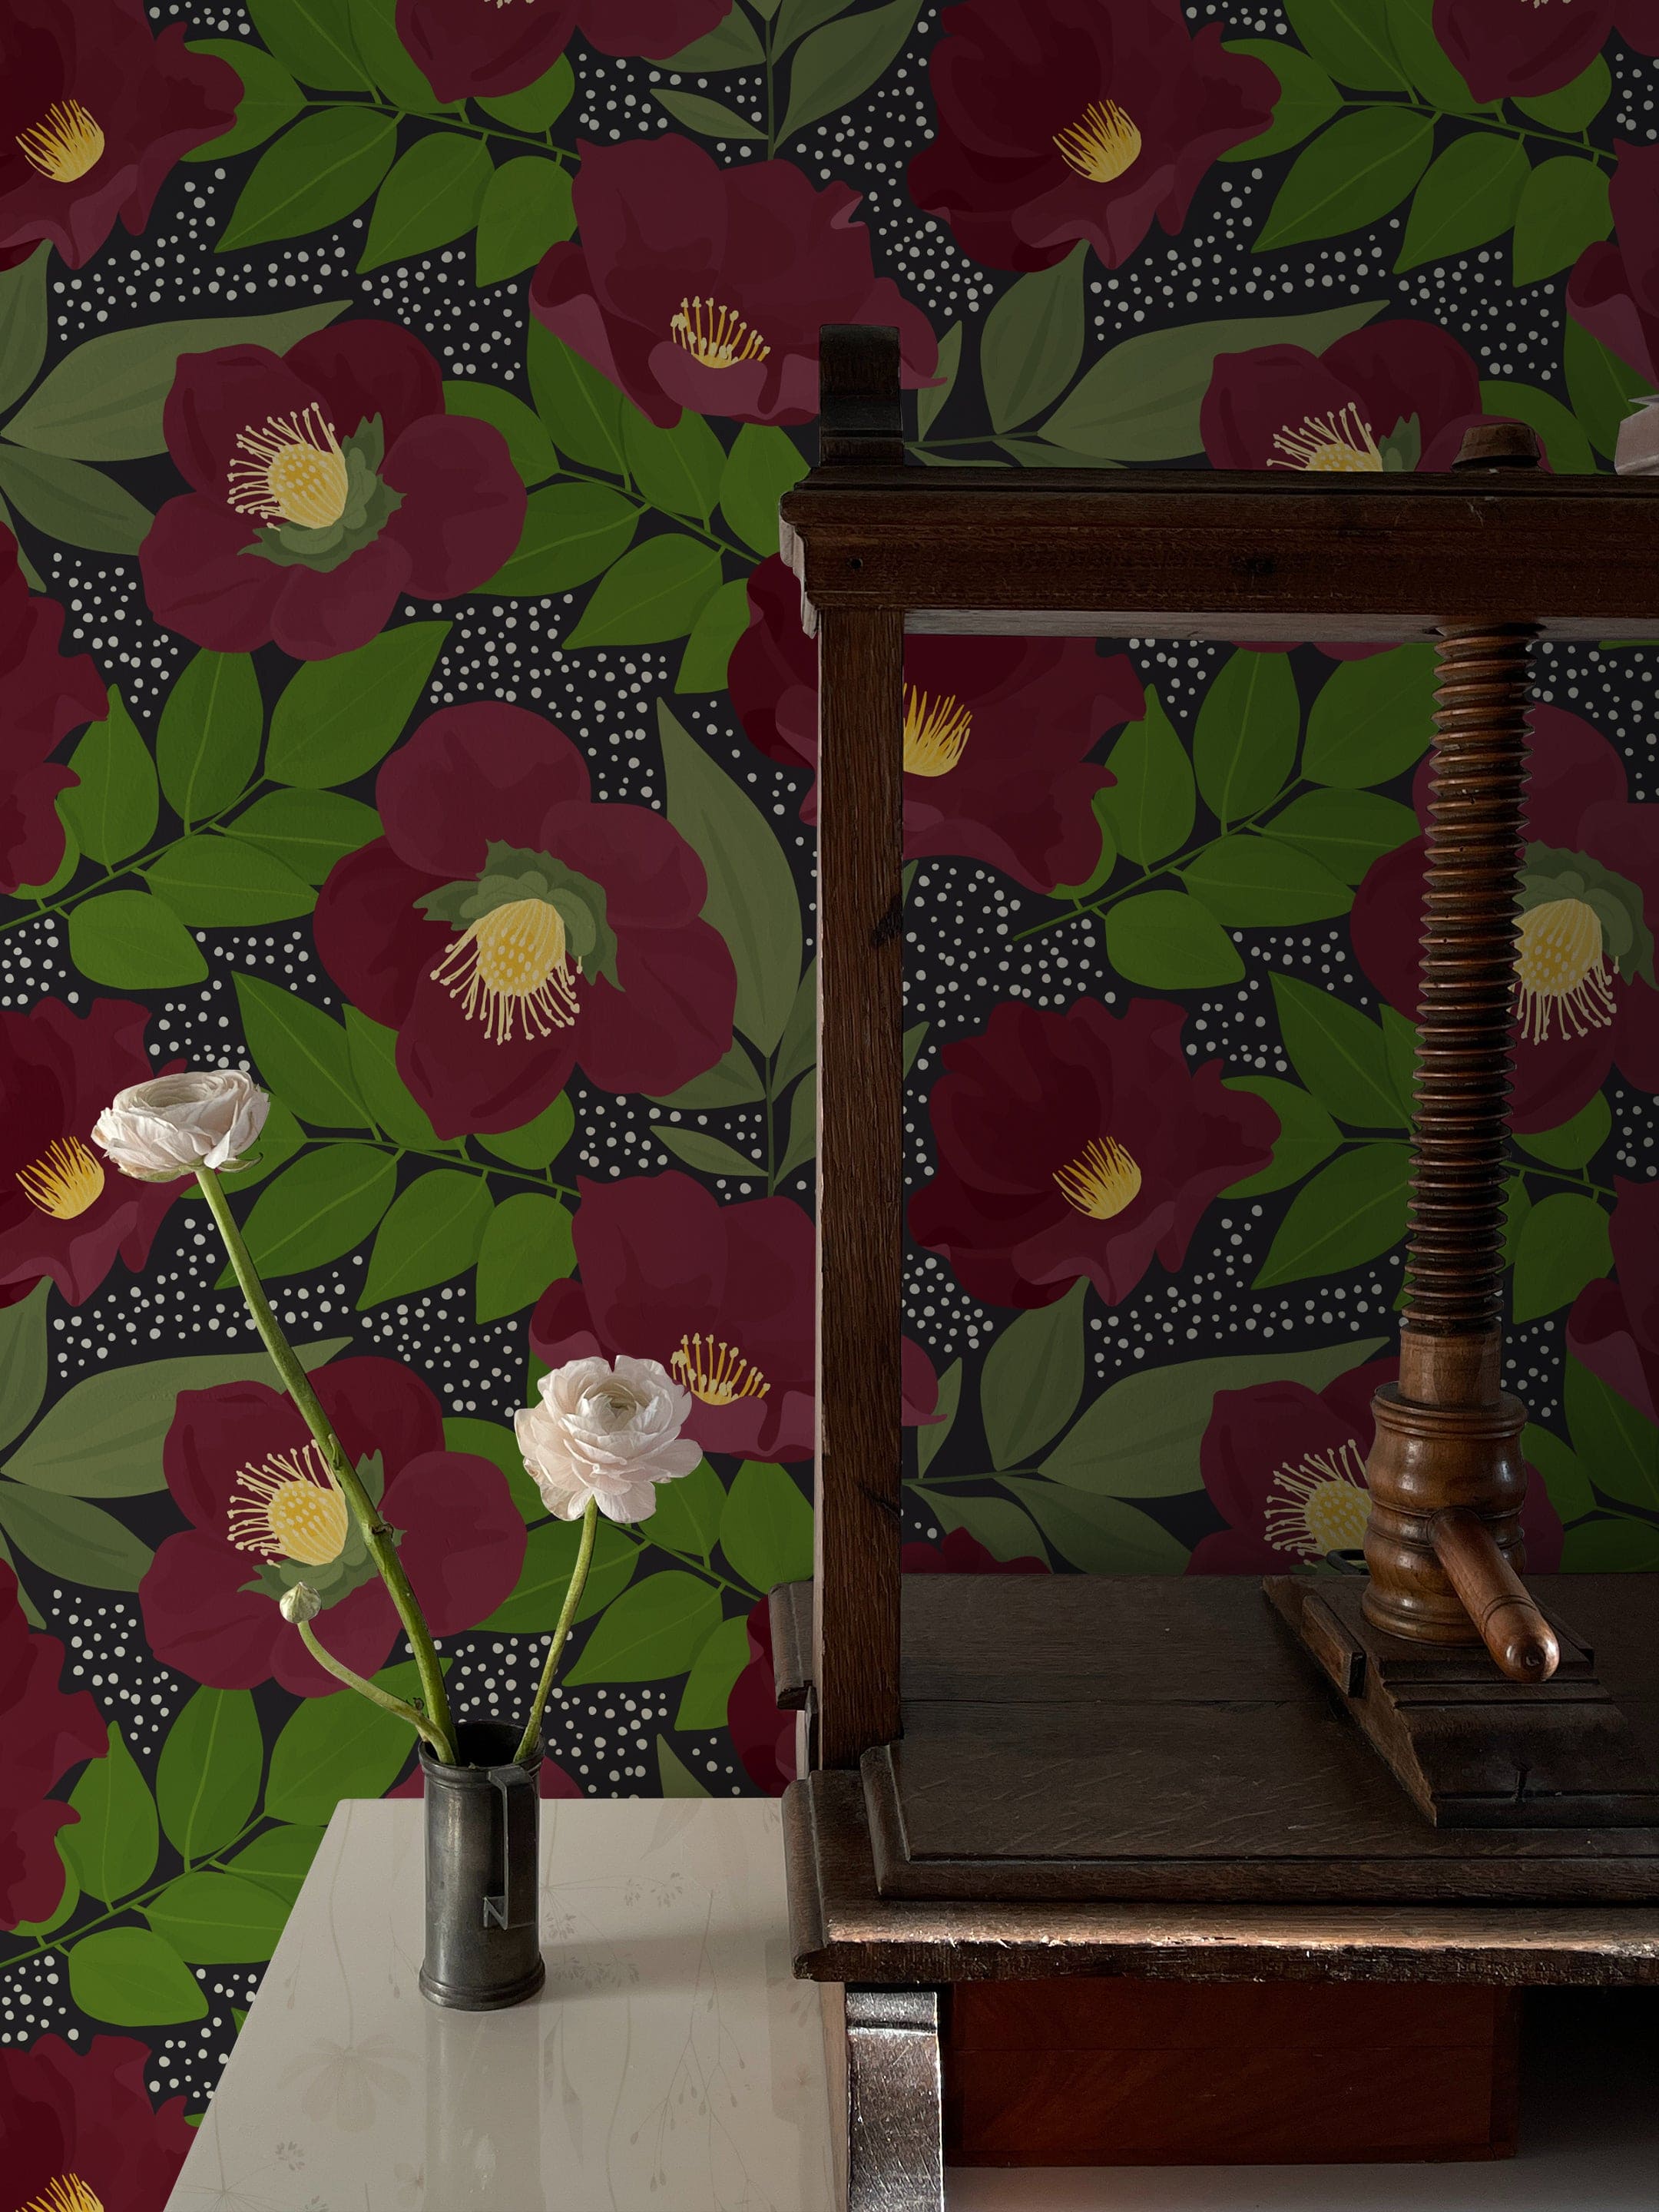 A sophisticated corner of a room showcasing the Merlot Floral Wallpaper, with its bold, merlot-colored blooms and vibrant green leaves on a dark, dotted background. The floral design is complemented by a vintage wooden table and a simple white rose in a black vase.